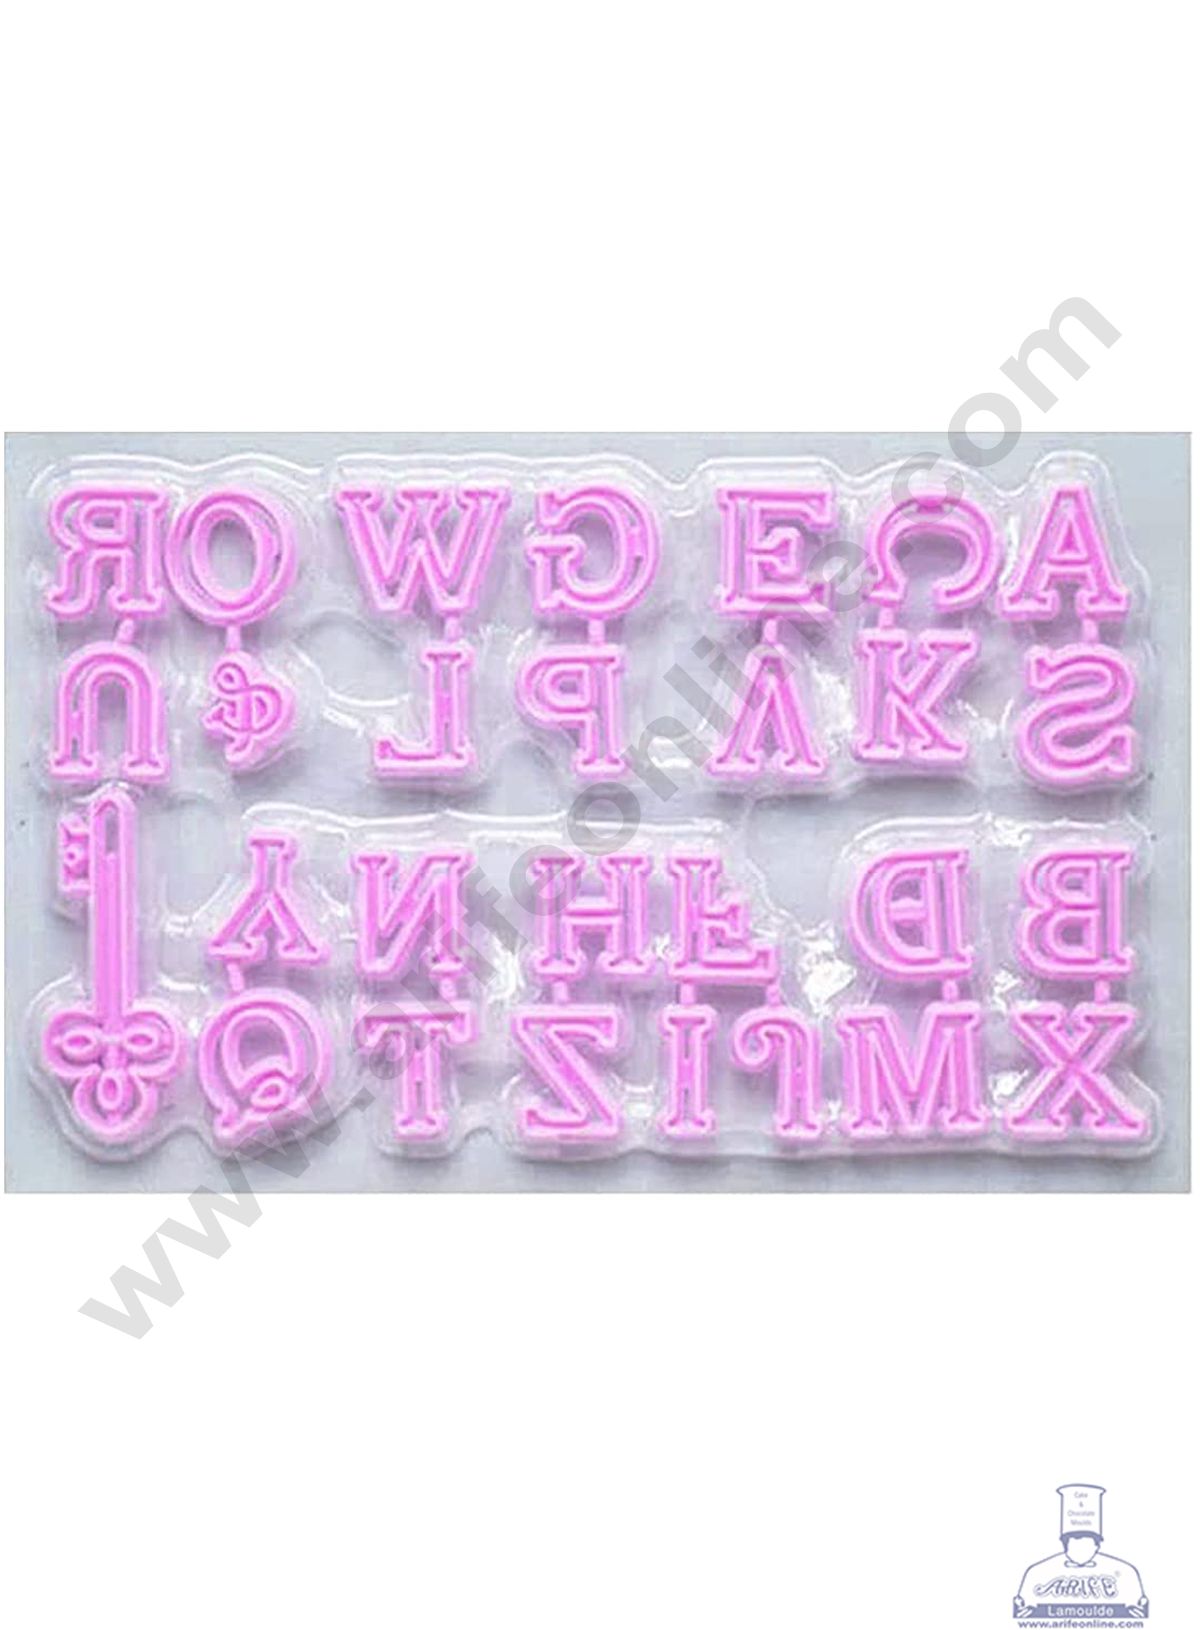 Action Comic Silicone Letter Cutter, Fondant Cakes